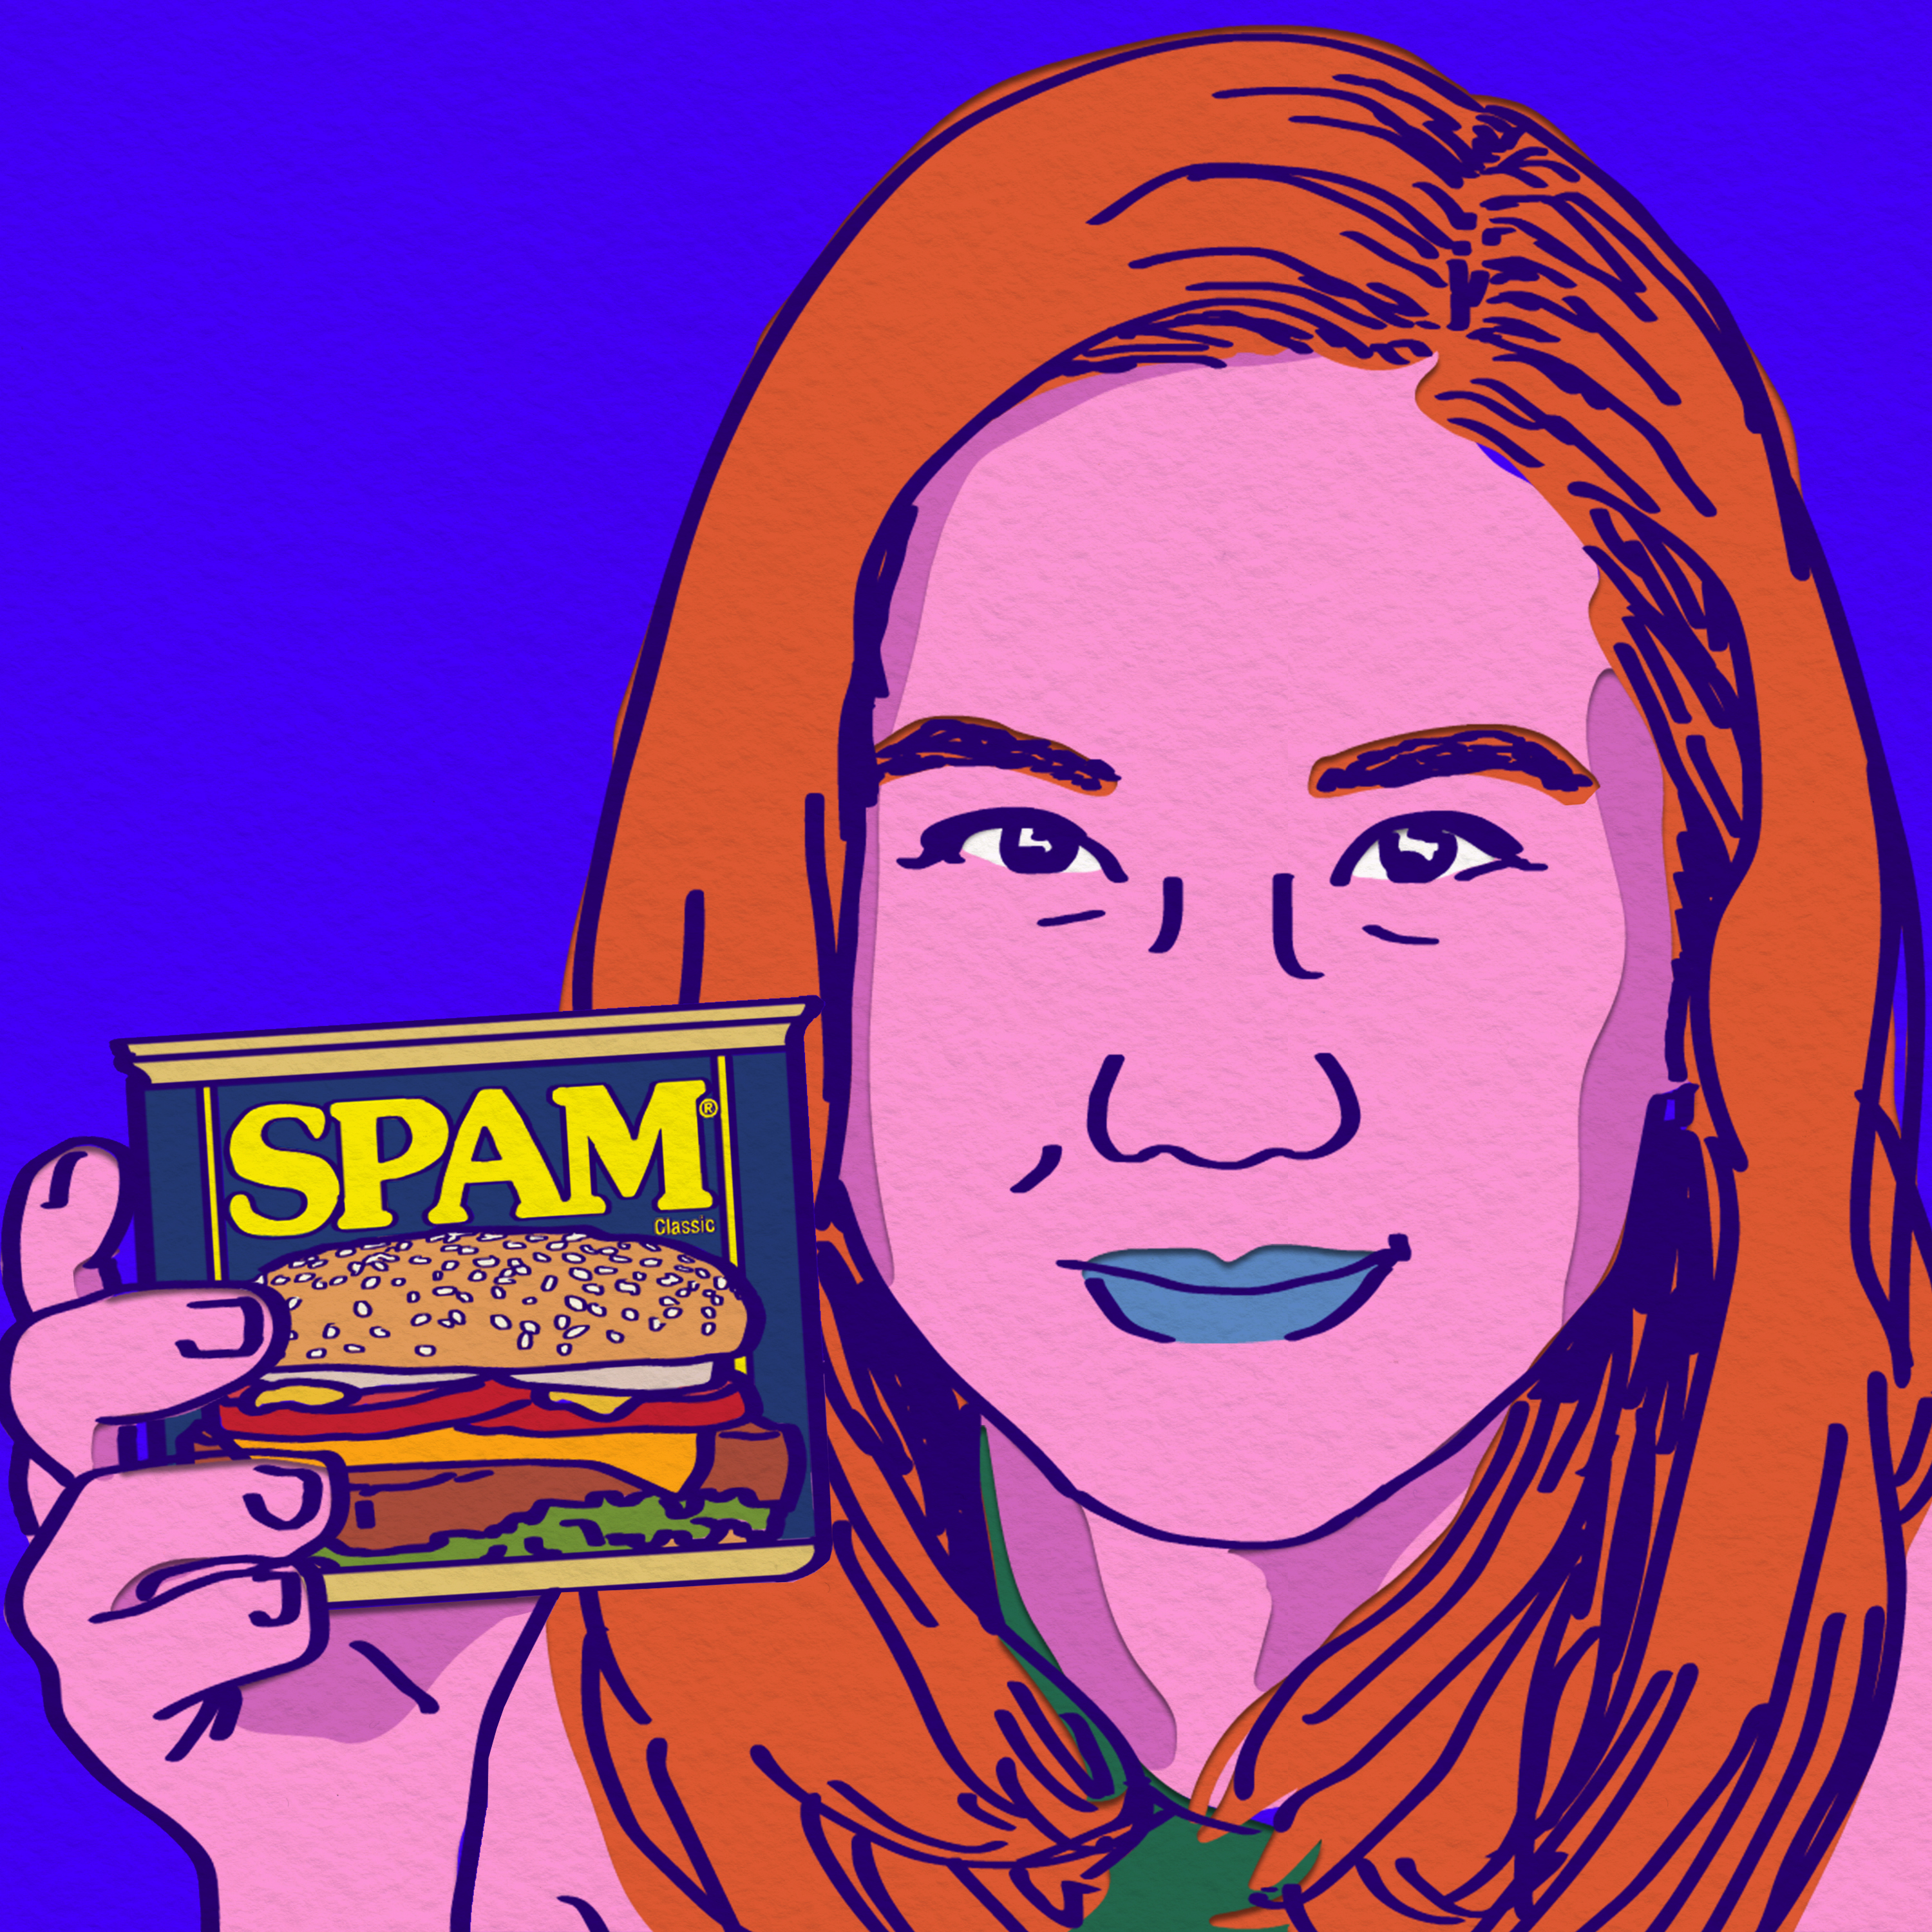 210: SPAM®